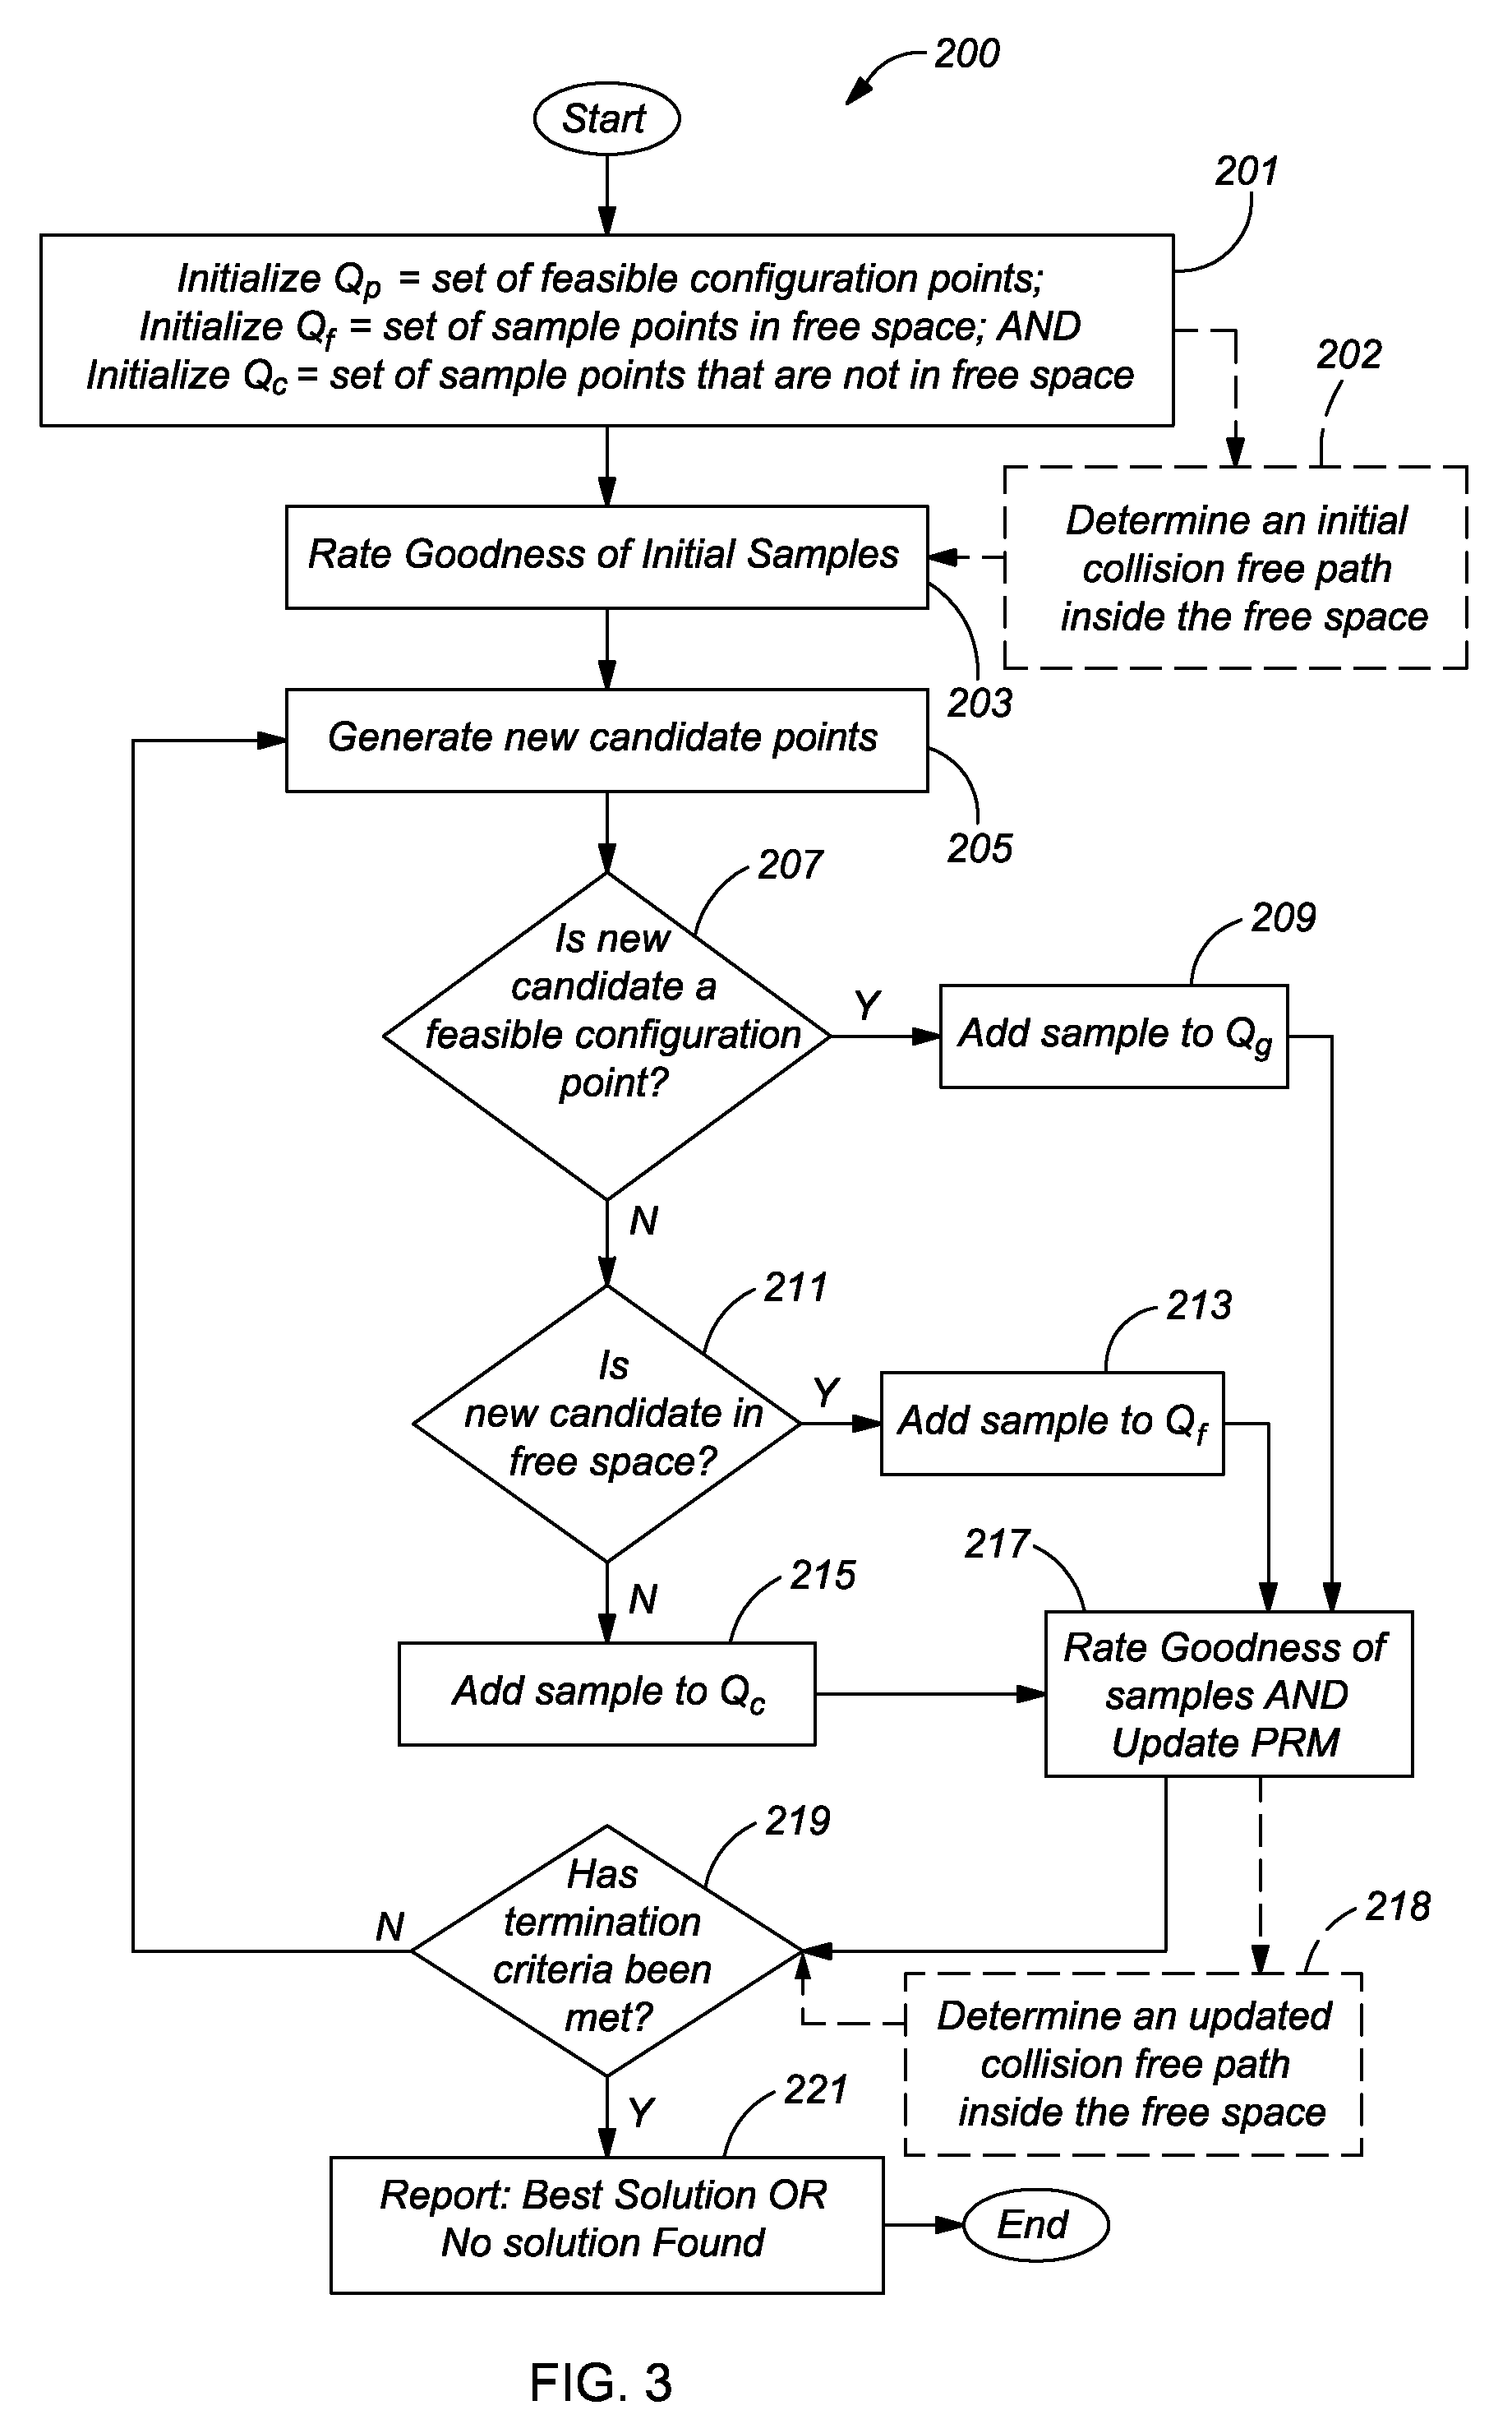 Apparatus and Method of Automated Manufacturing